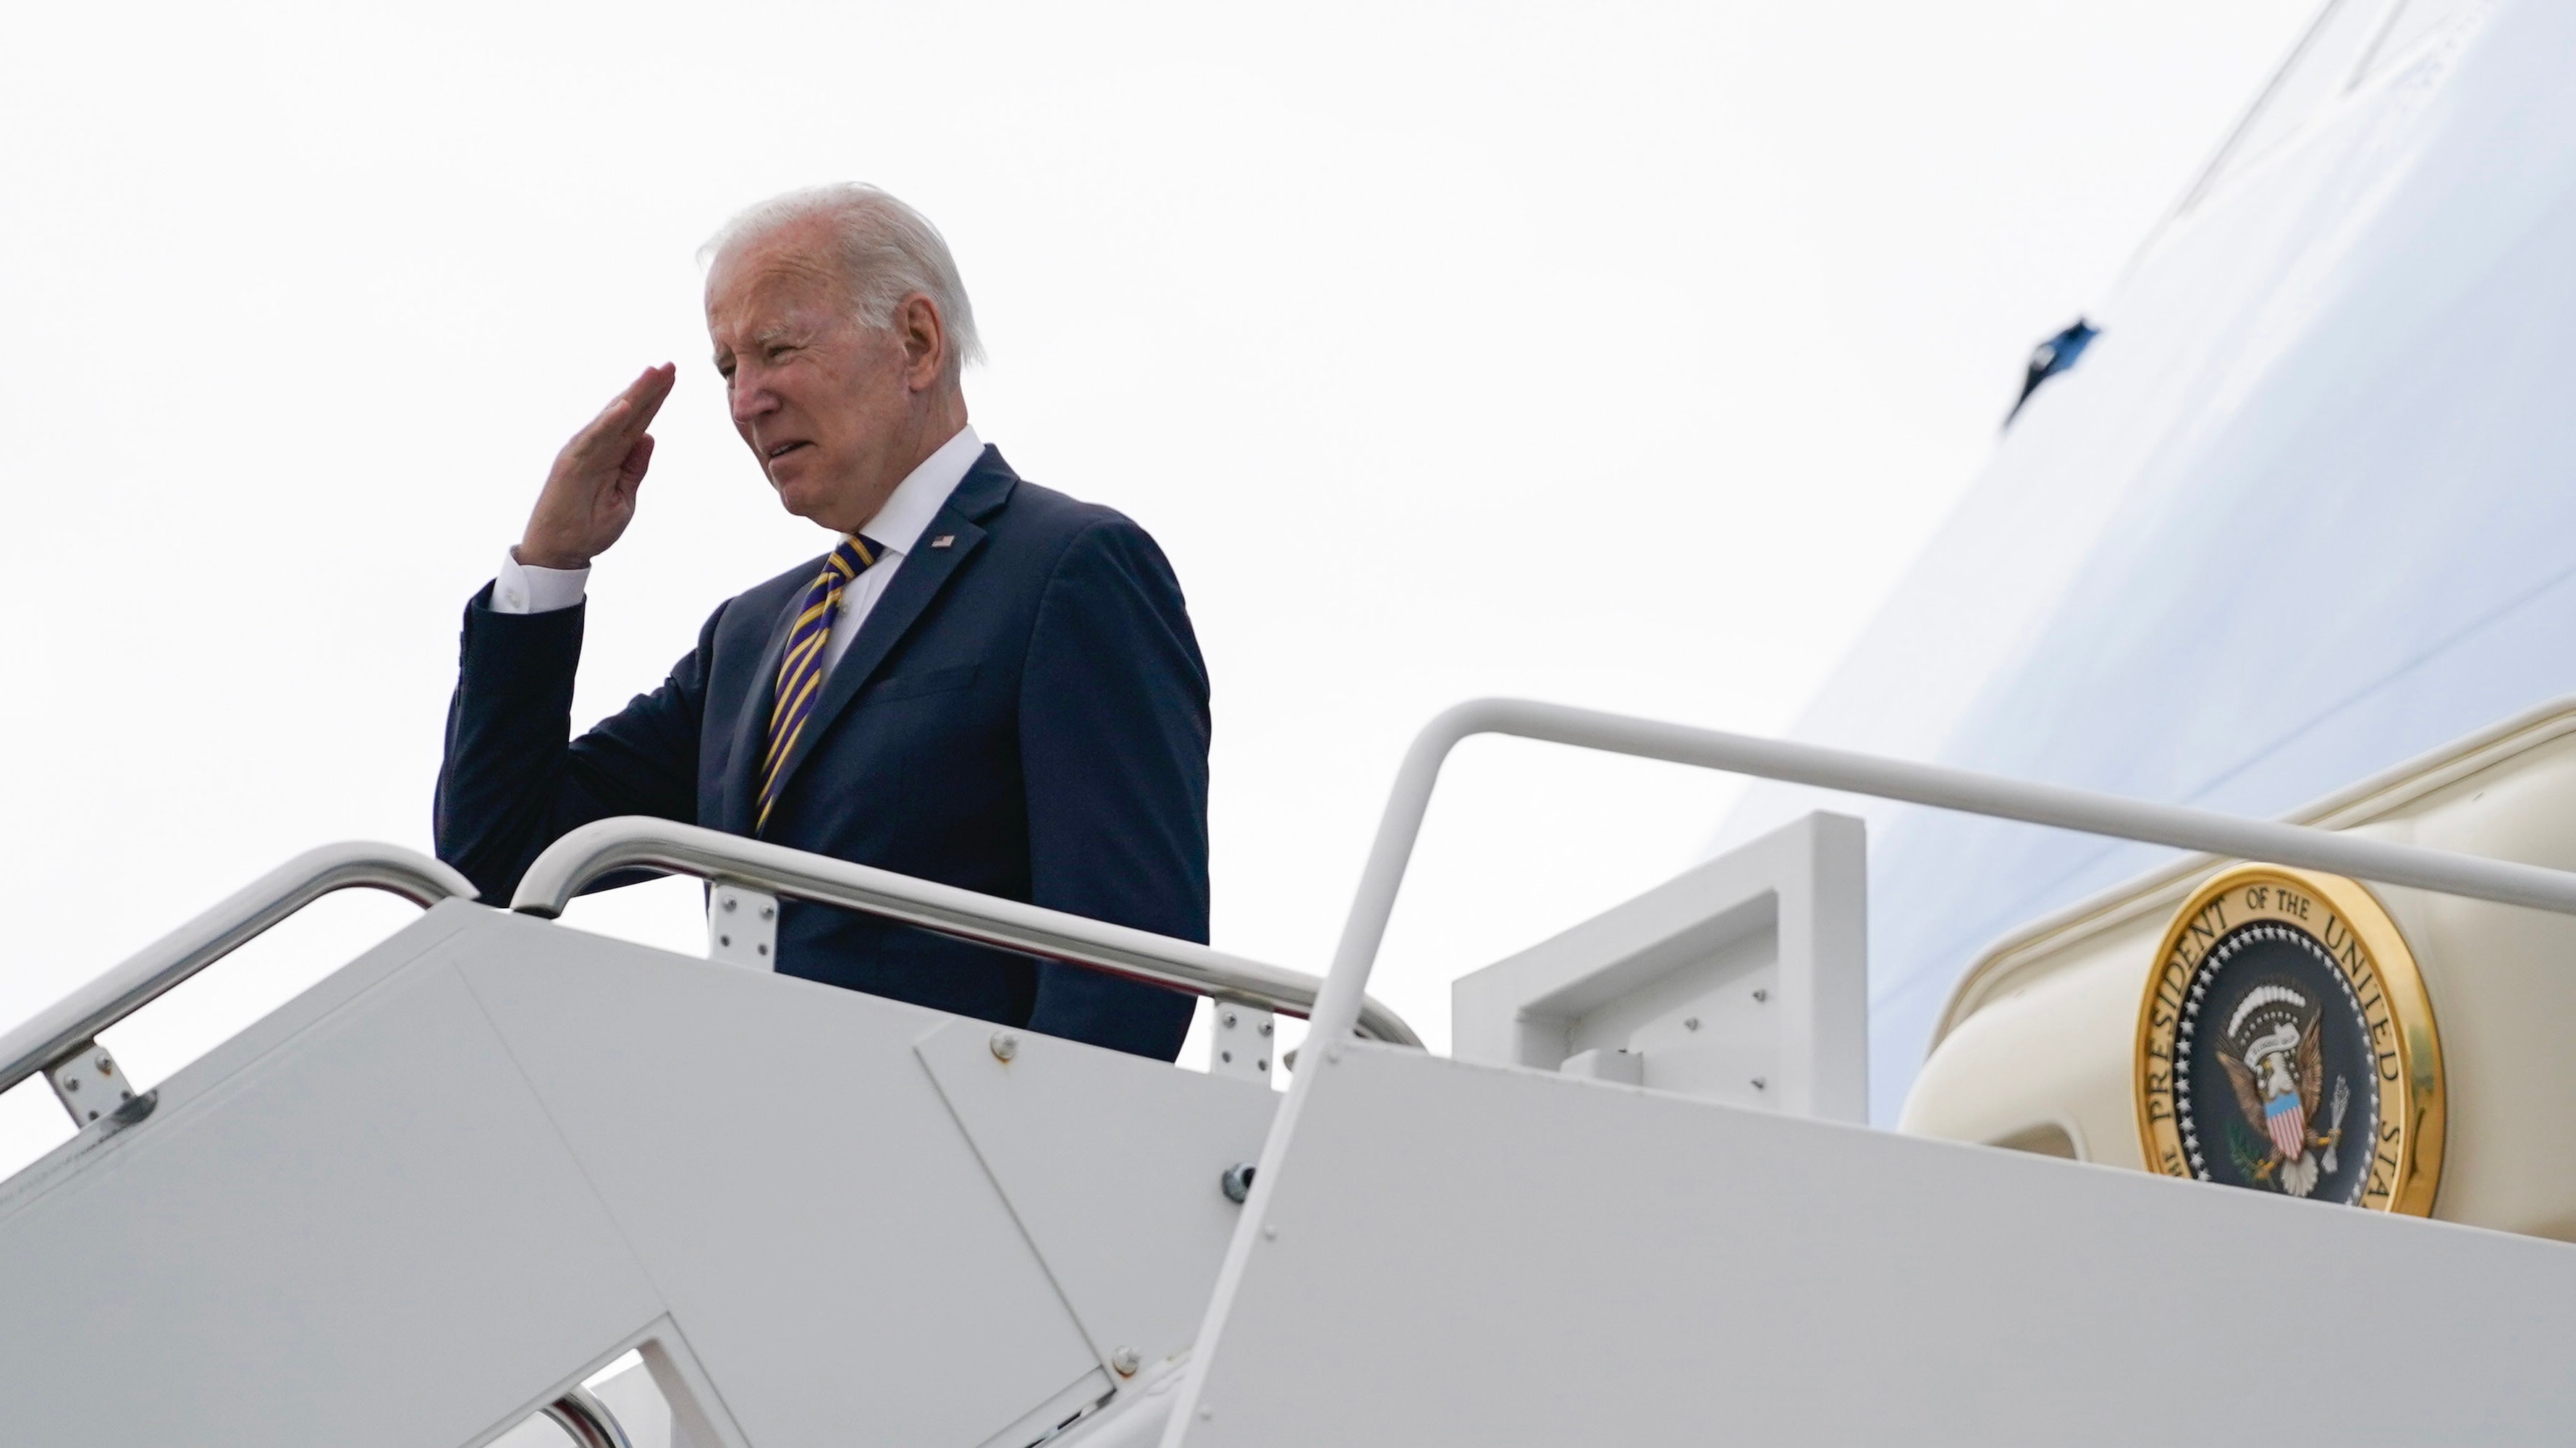 Some top Democrats keep their distance as Biden stops in Ohio on Wednesday